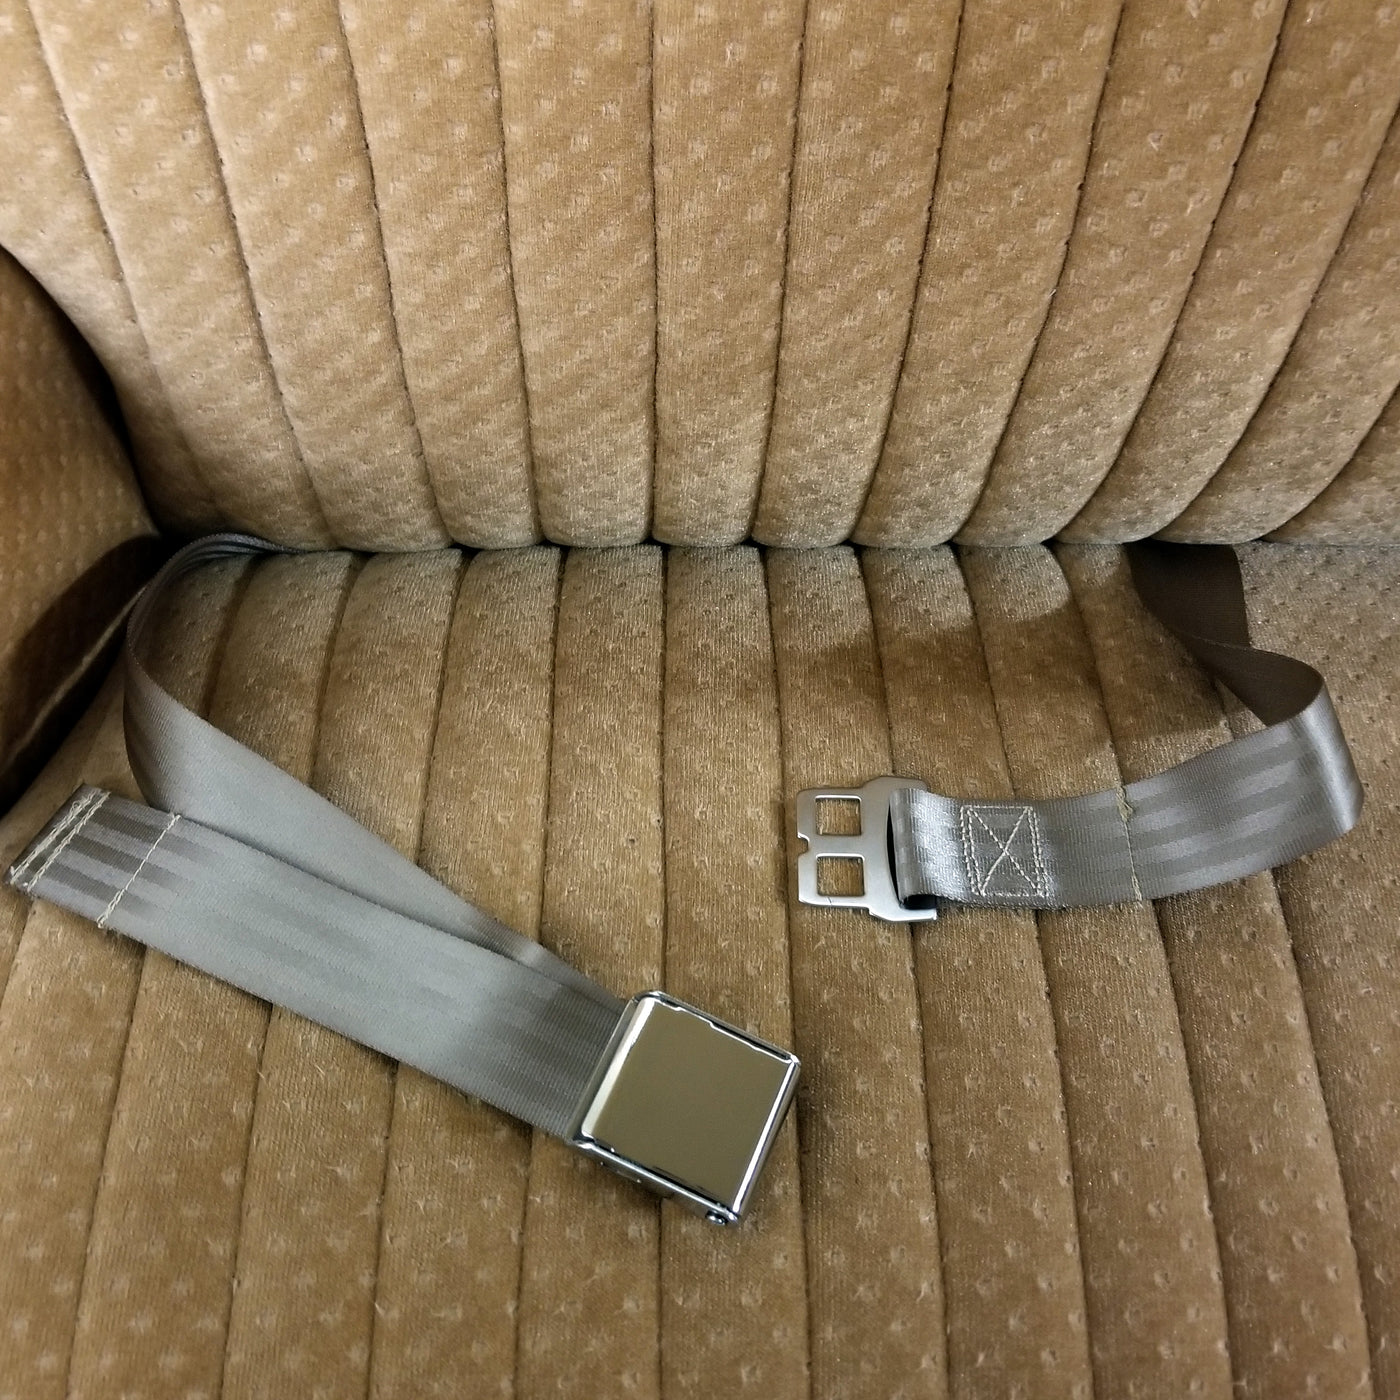 Grey 2-Point Lap Airplane Buckle Seat Belt Installed in Car Interior Bench Seat